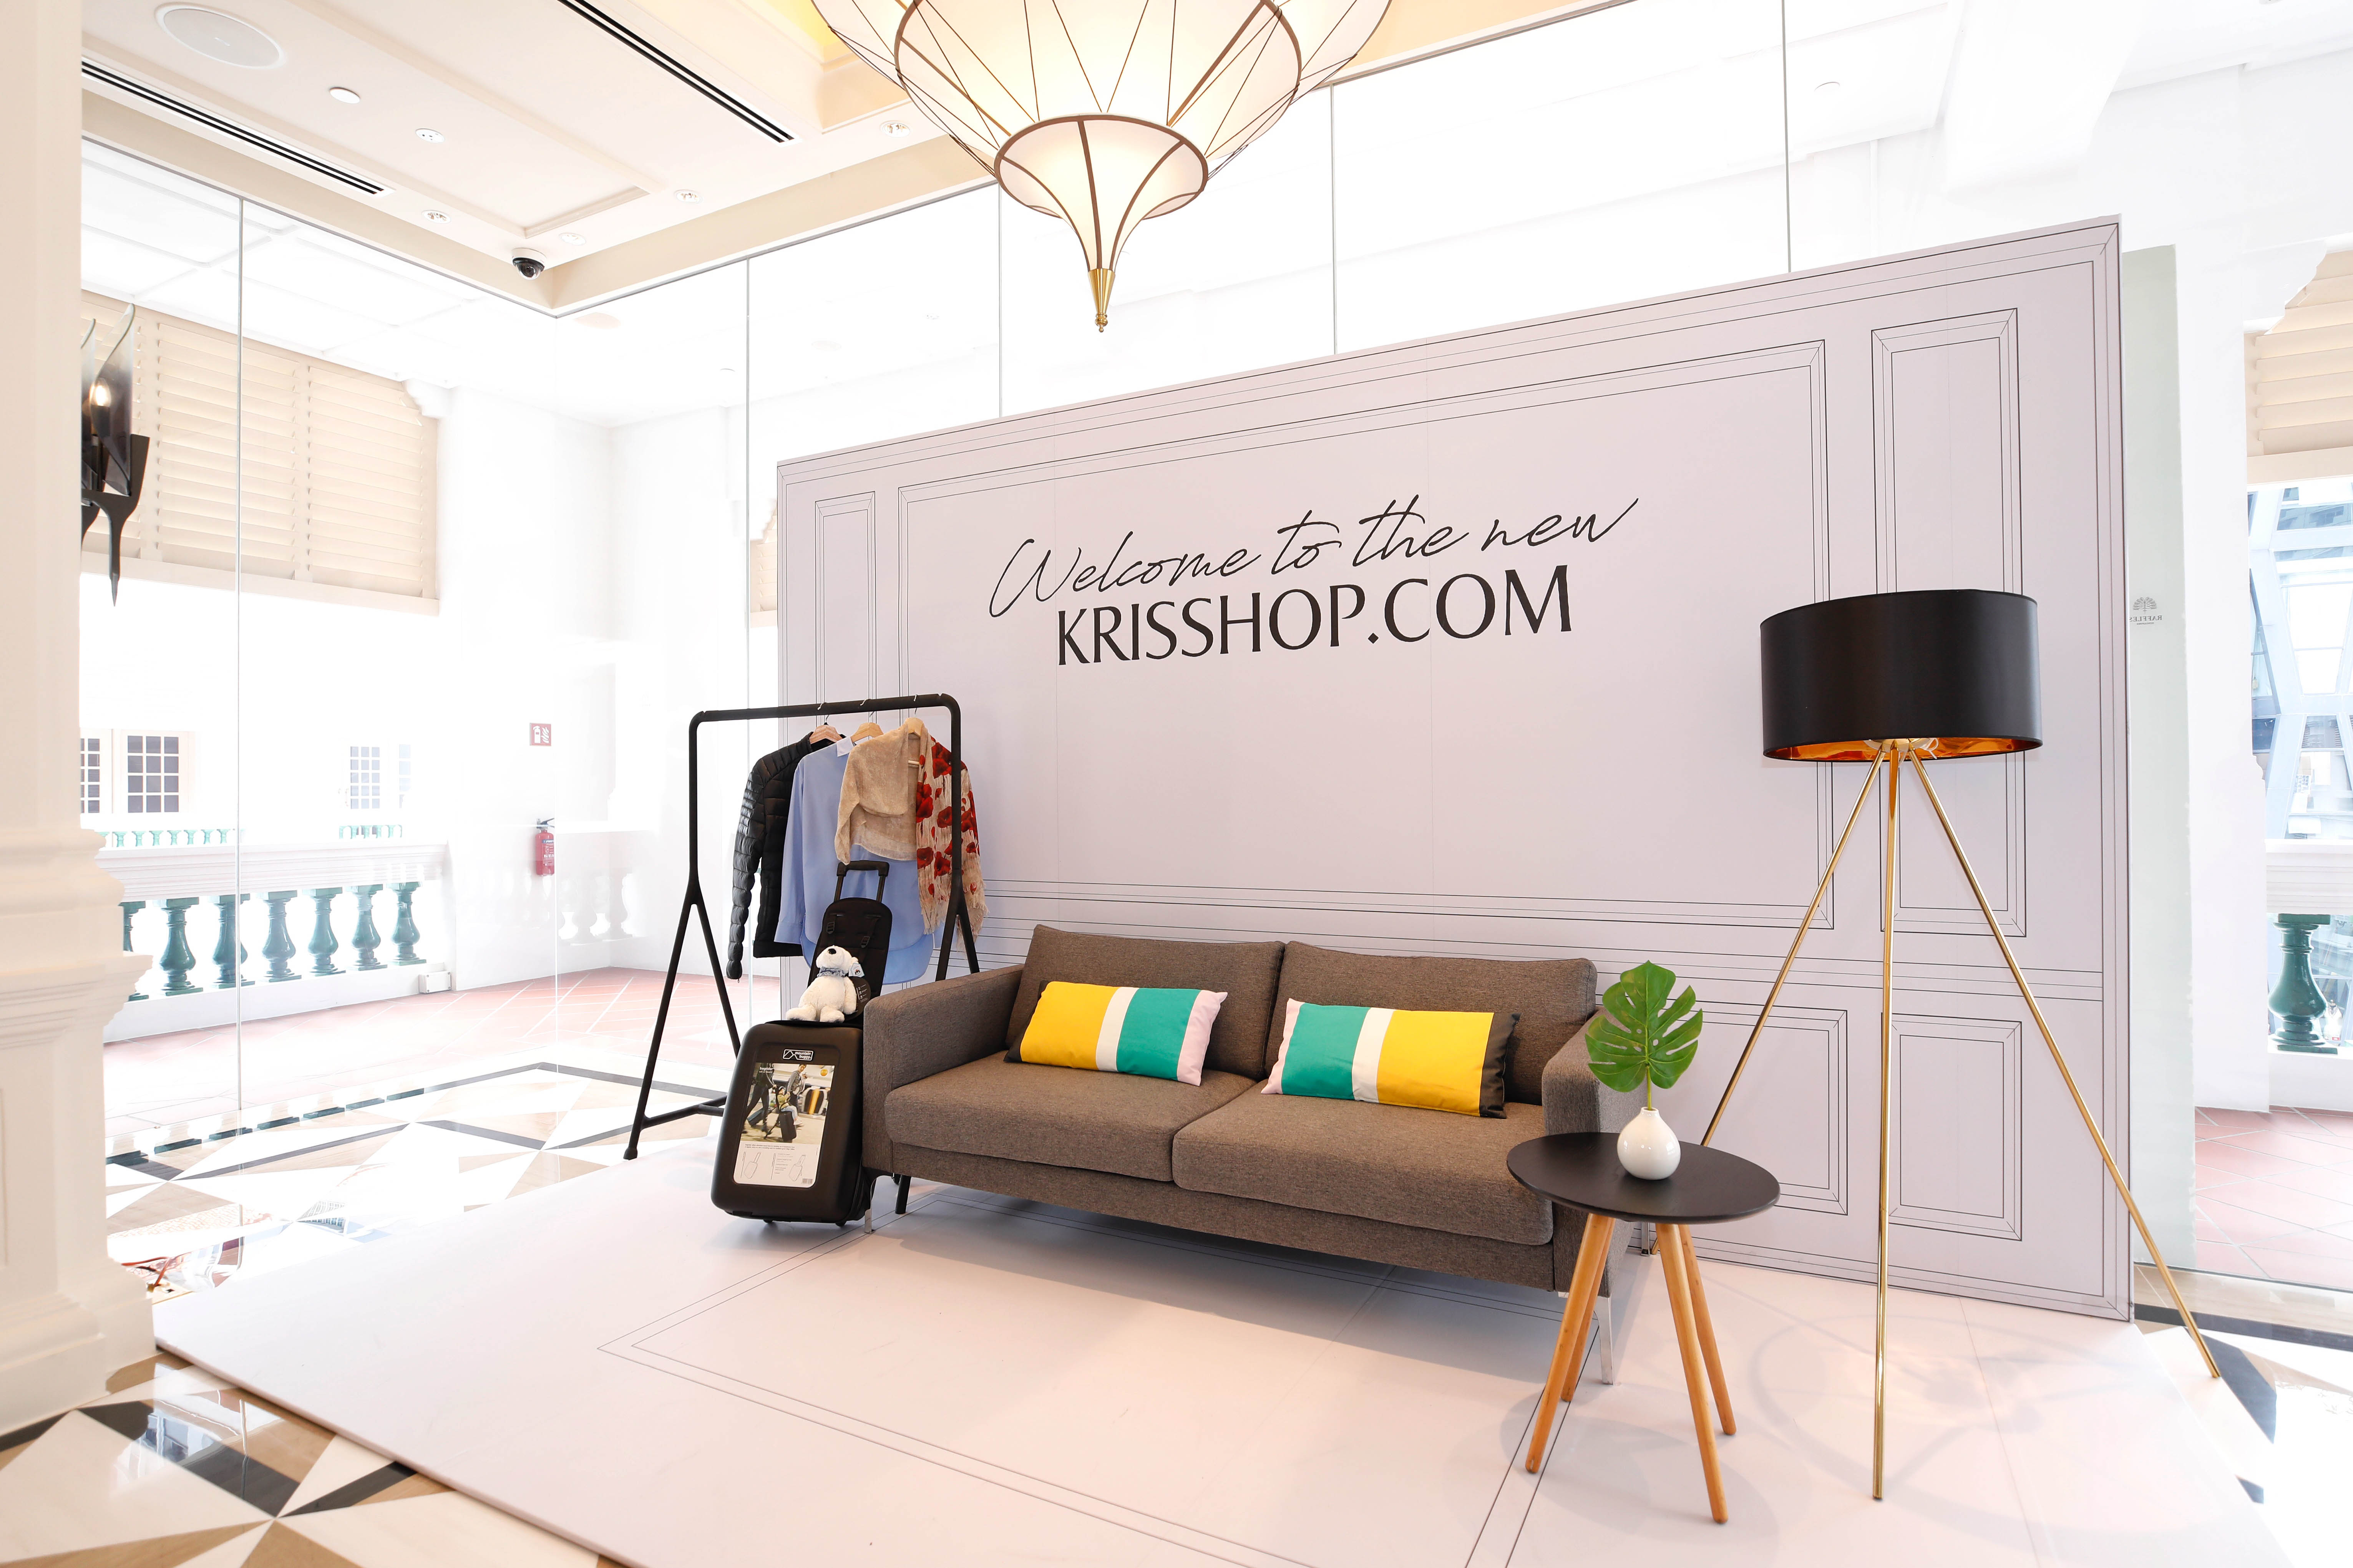 KrisShop celebrates rebranding with an interactive pop-up exhibition at Raffles Hotel’s Palm this 23-24 August - Alvinology